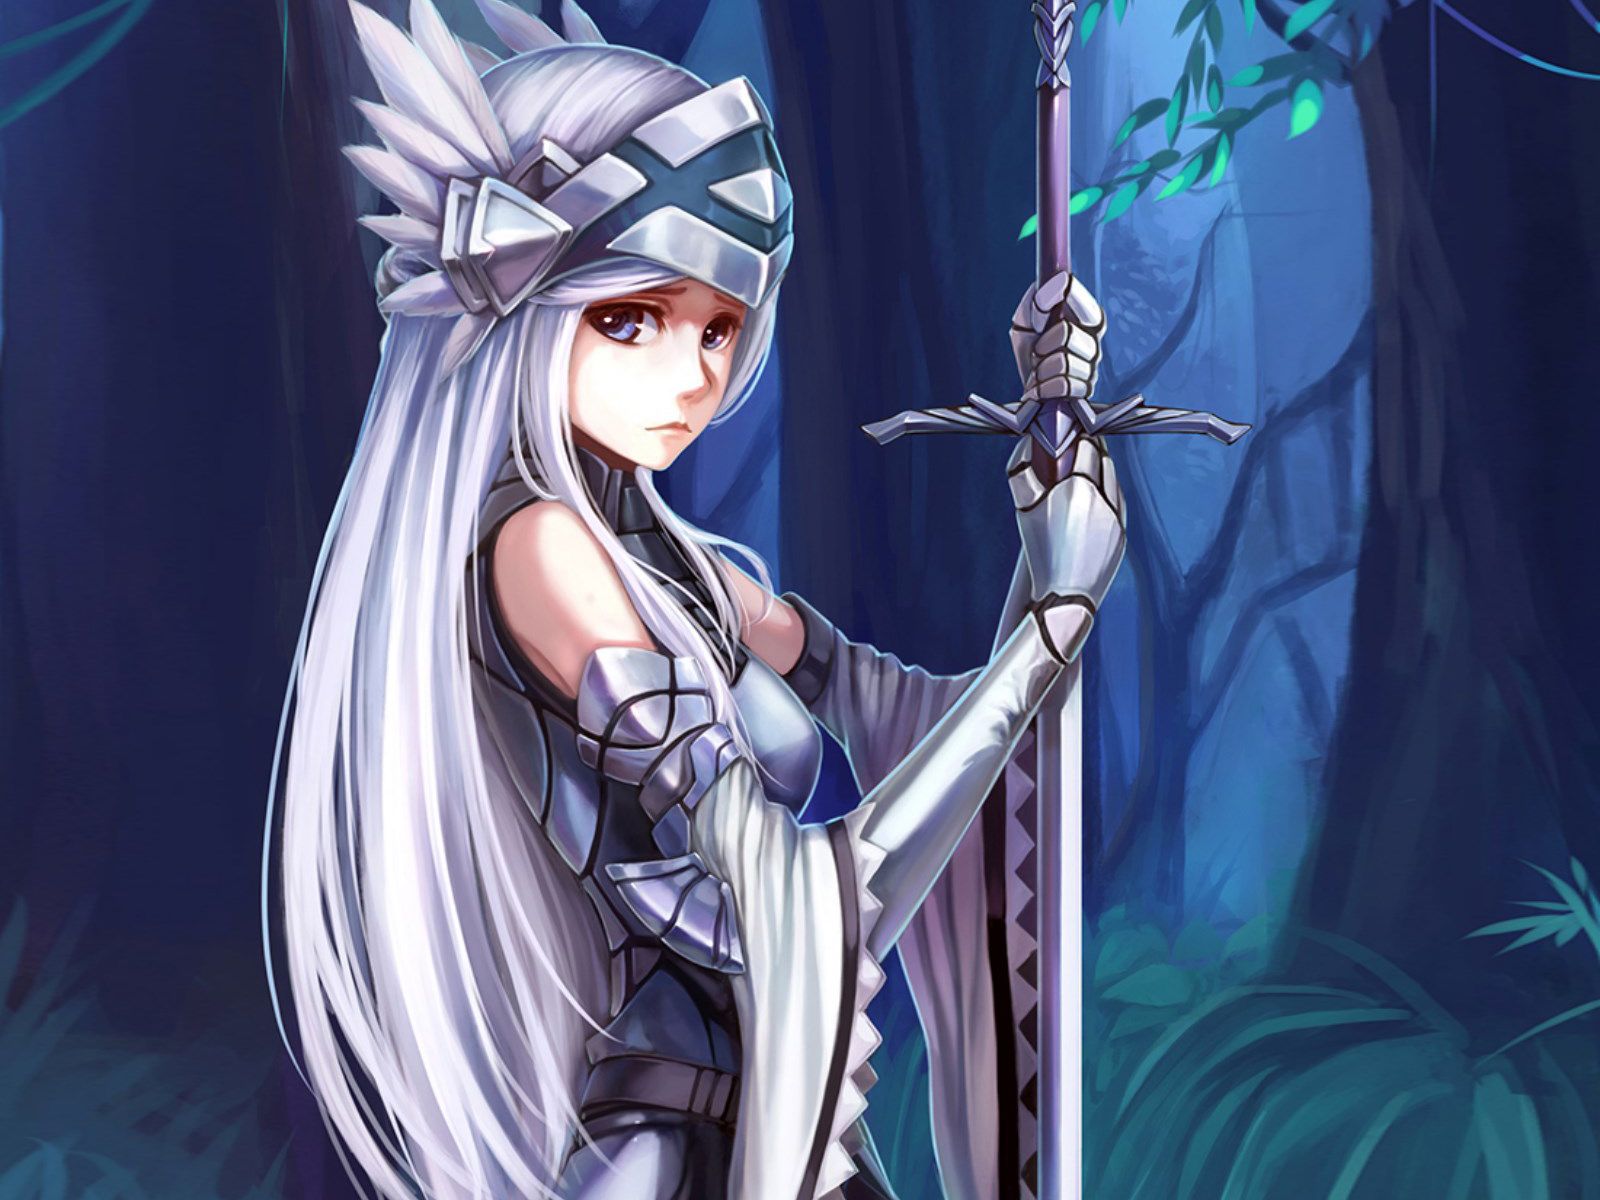 Lexica  a anime girl cropped with a sword made of gold and half chest armor  in silver color